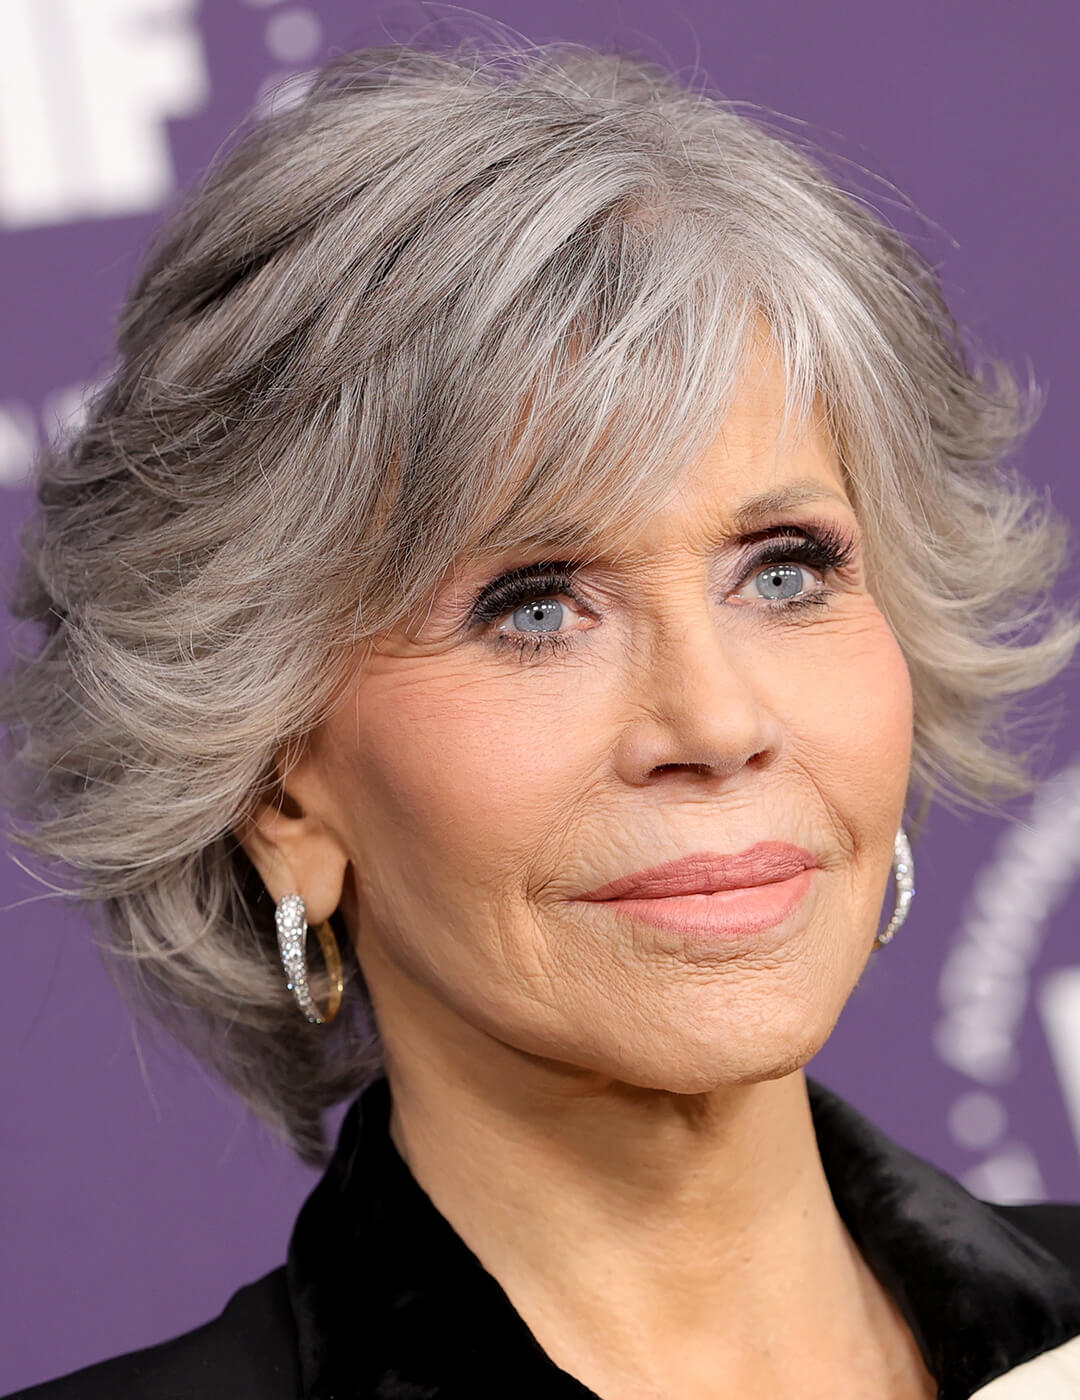 15 Best Celebrity Gray, Silver Hairstyles to Try | IPSY